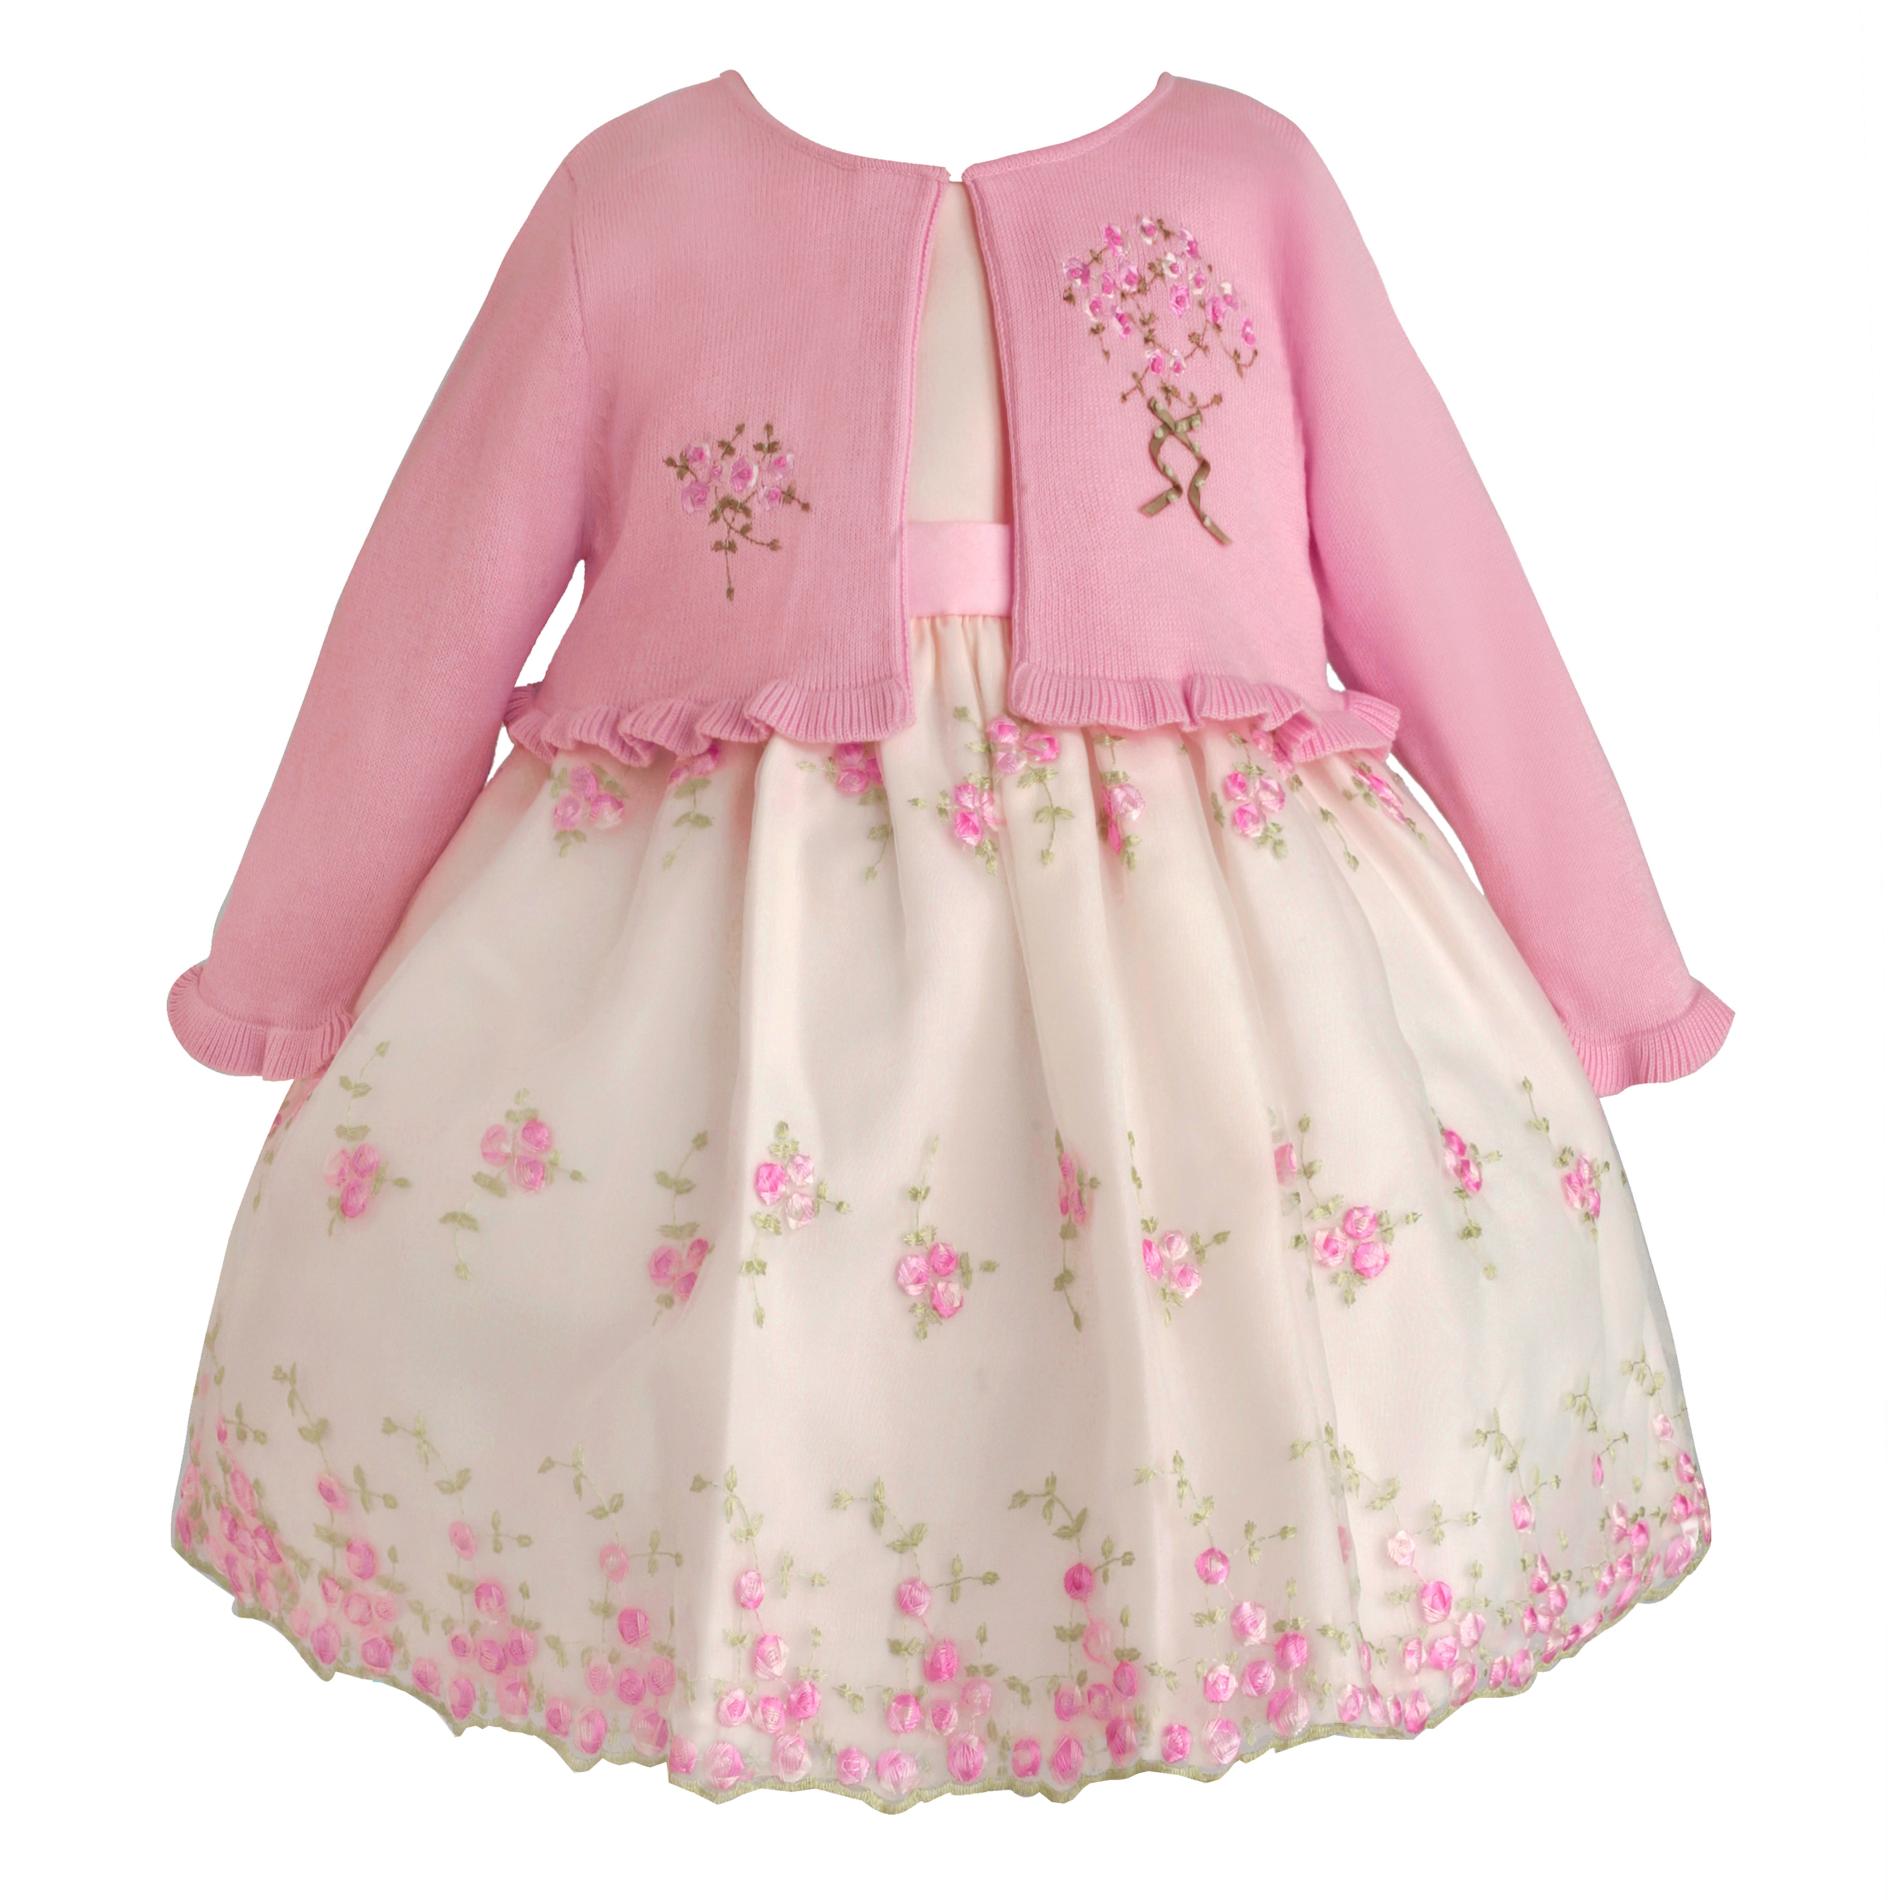 American Princess Infant Girl's Party Dress